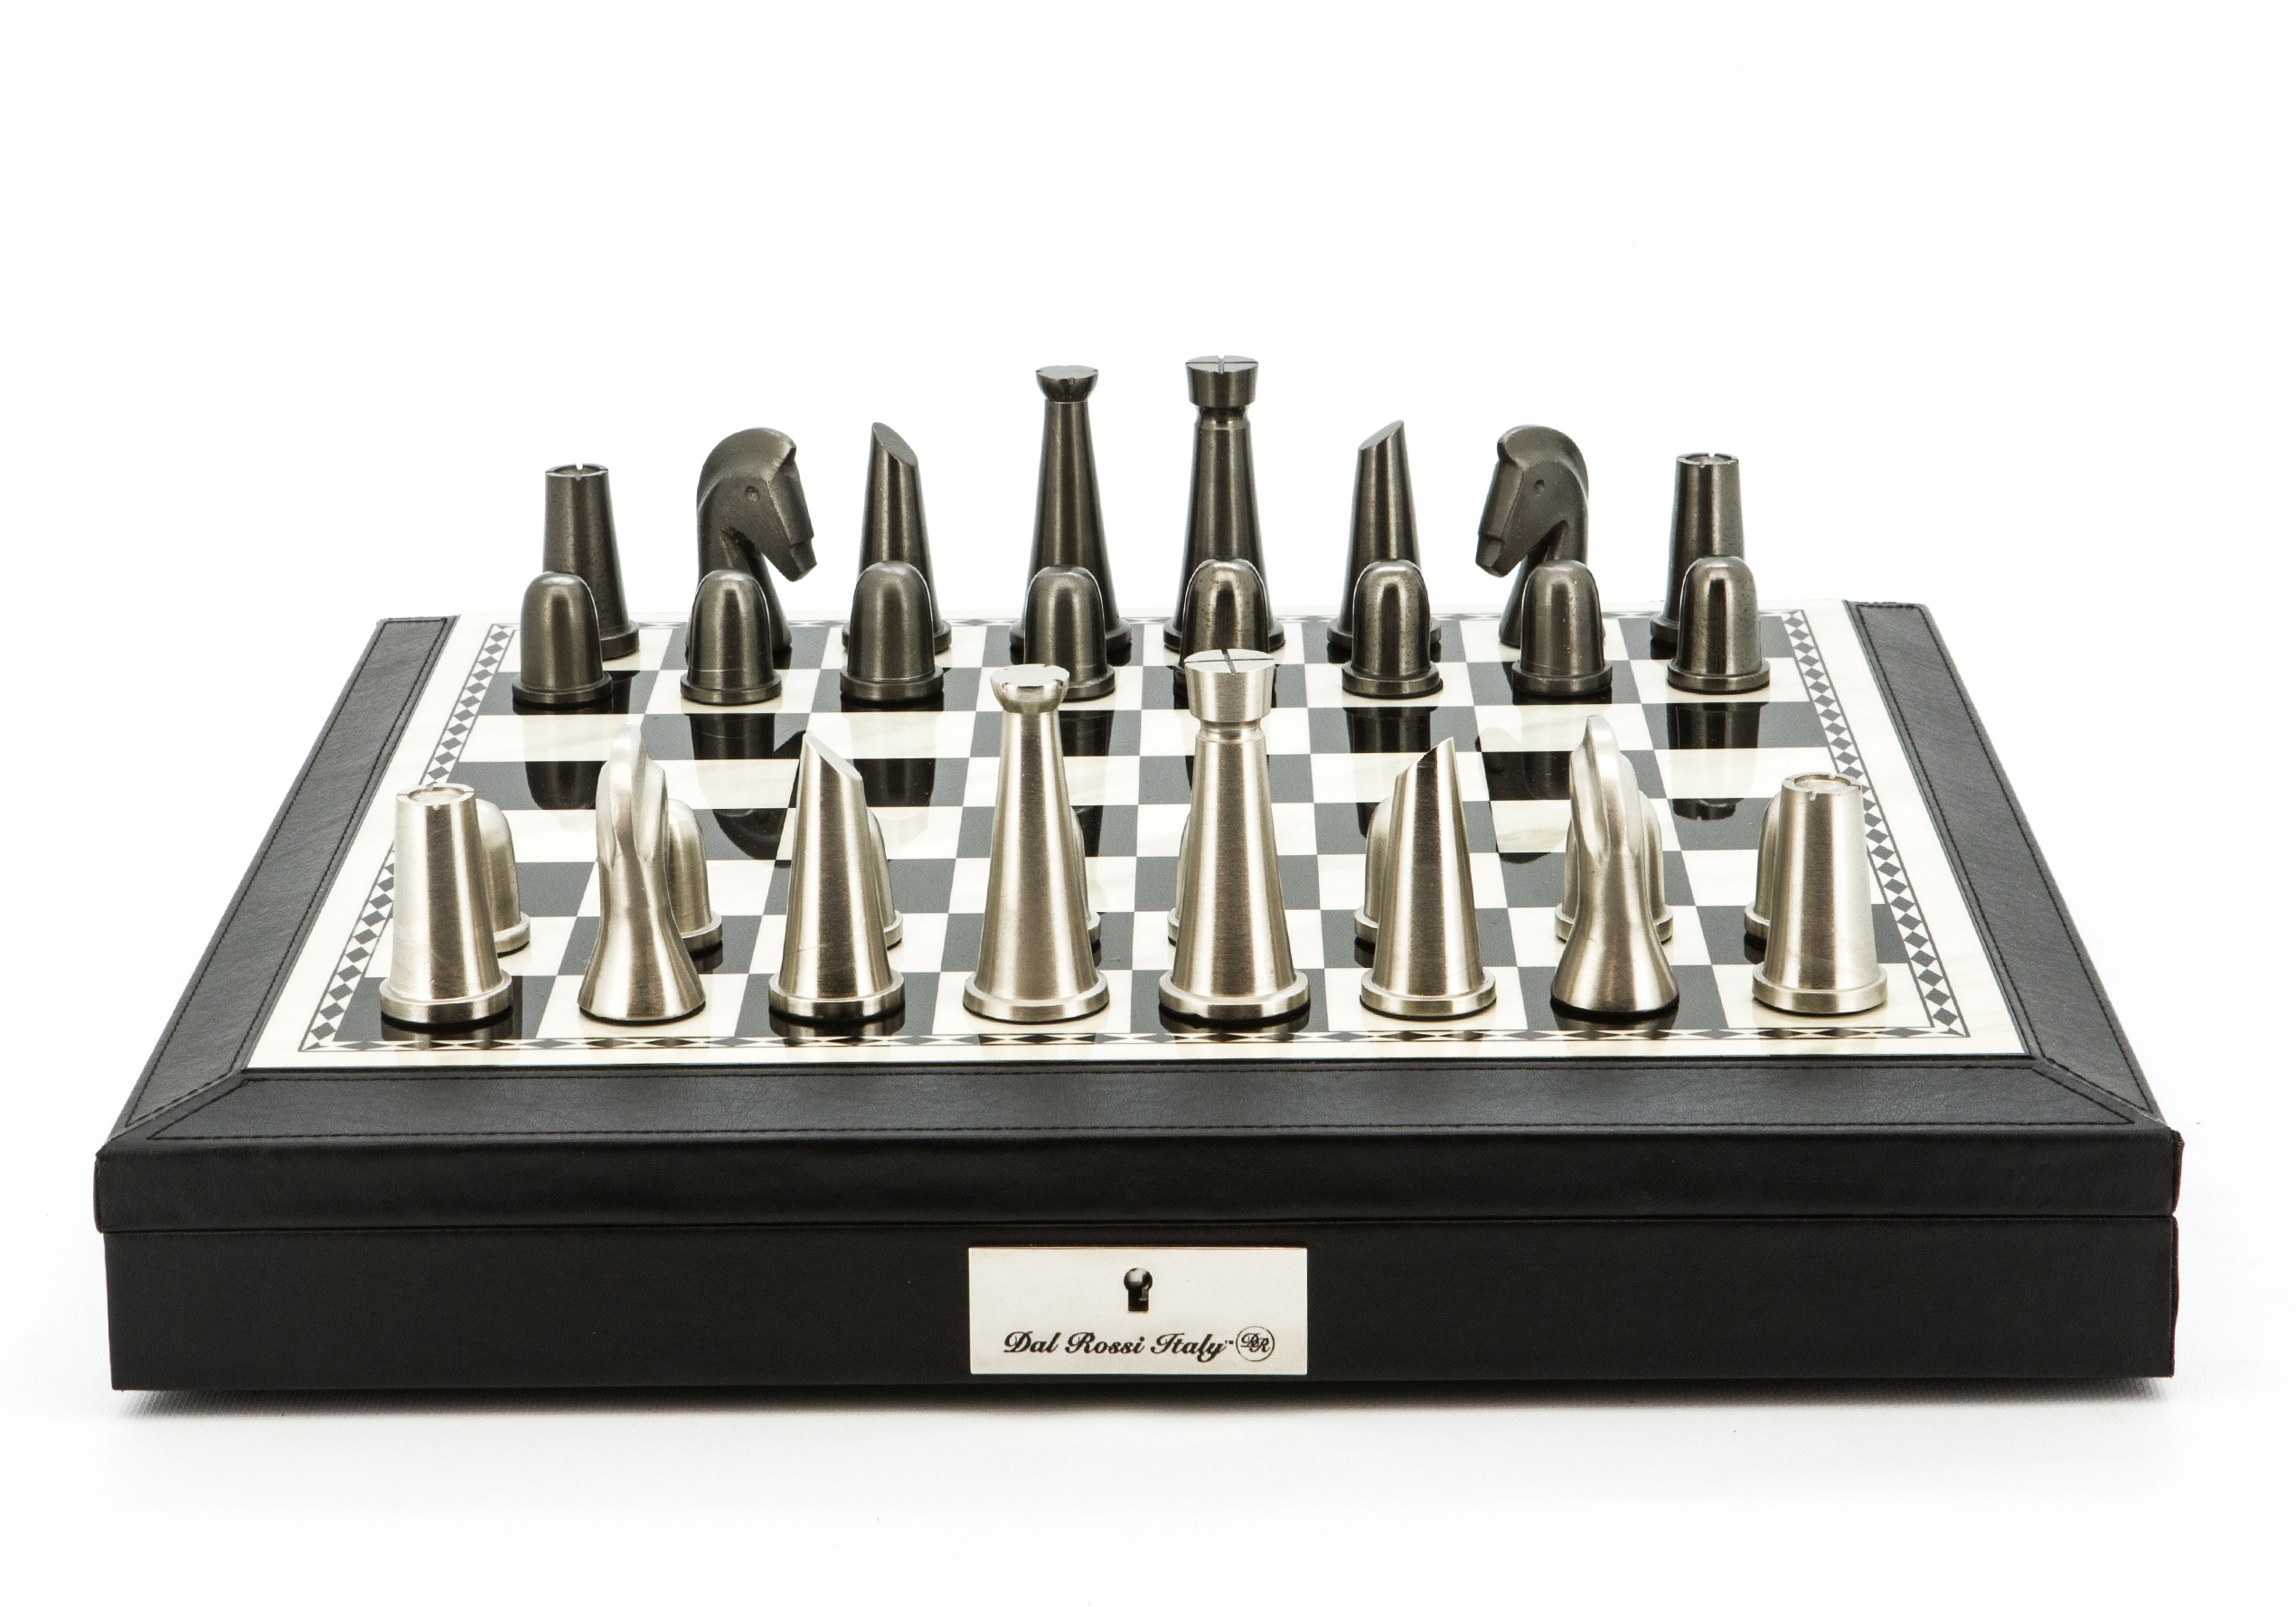 Dal Rossi Italy Chess Set 18” Black and White with Black PU Leather Edge with compartments, With Metal Dark Titanium and Silver chessmen 85mm